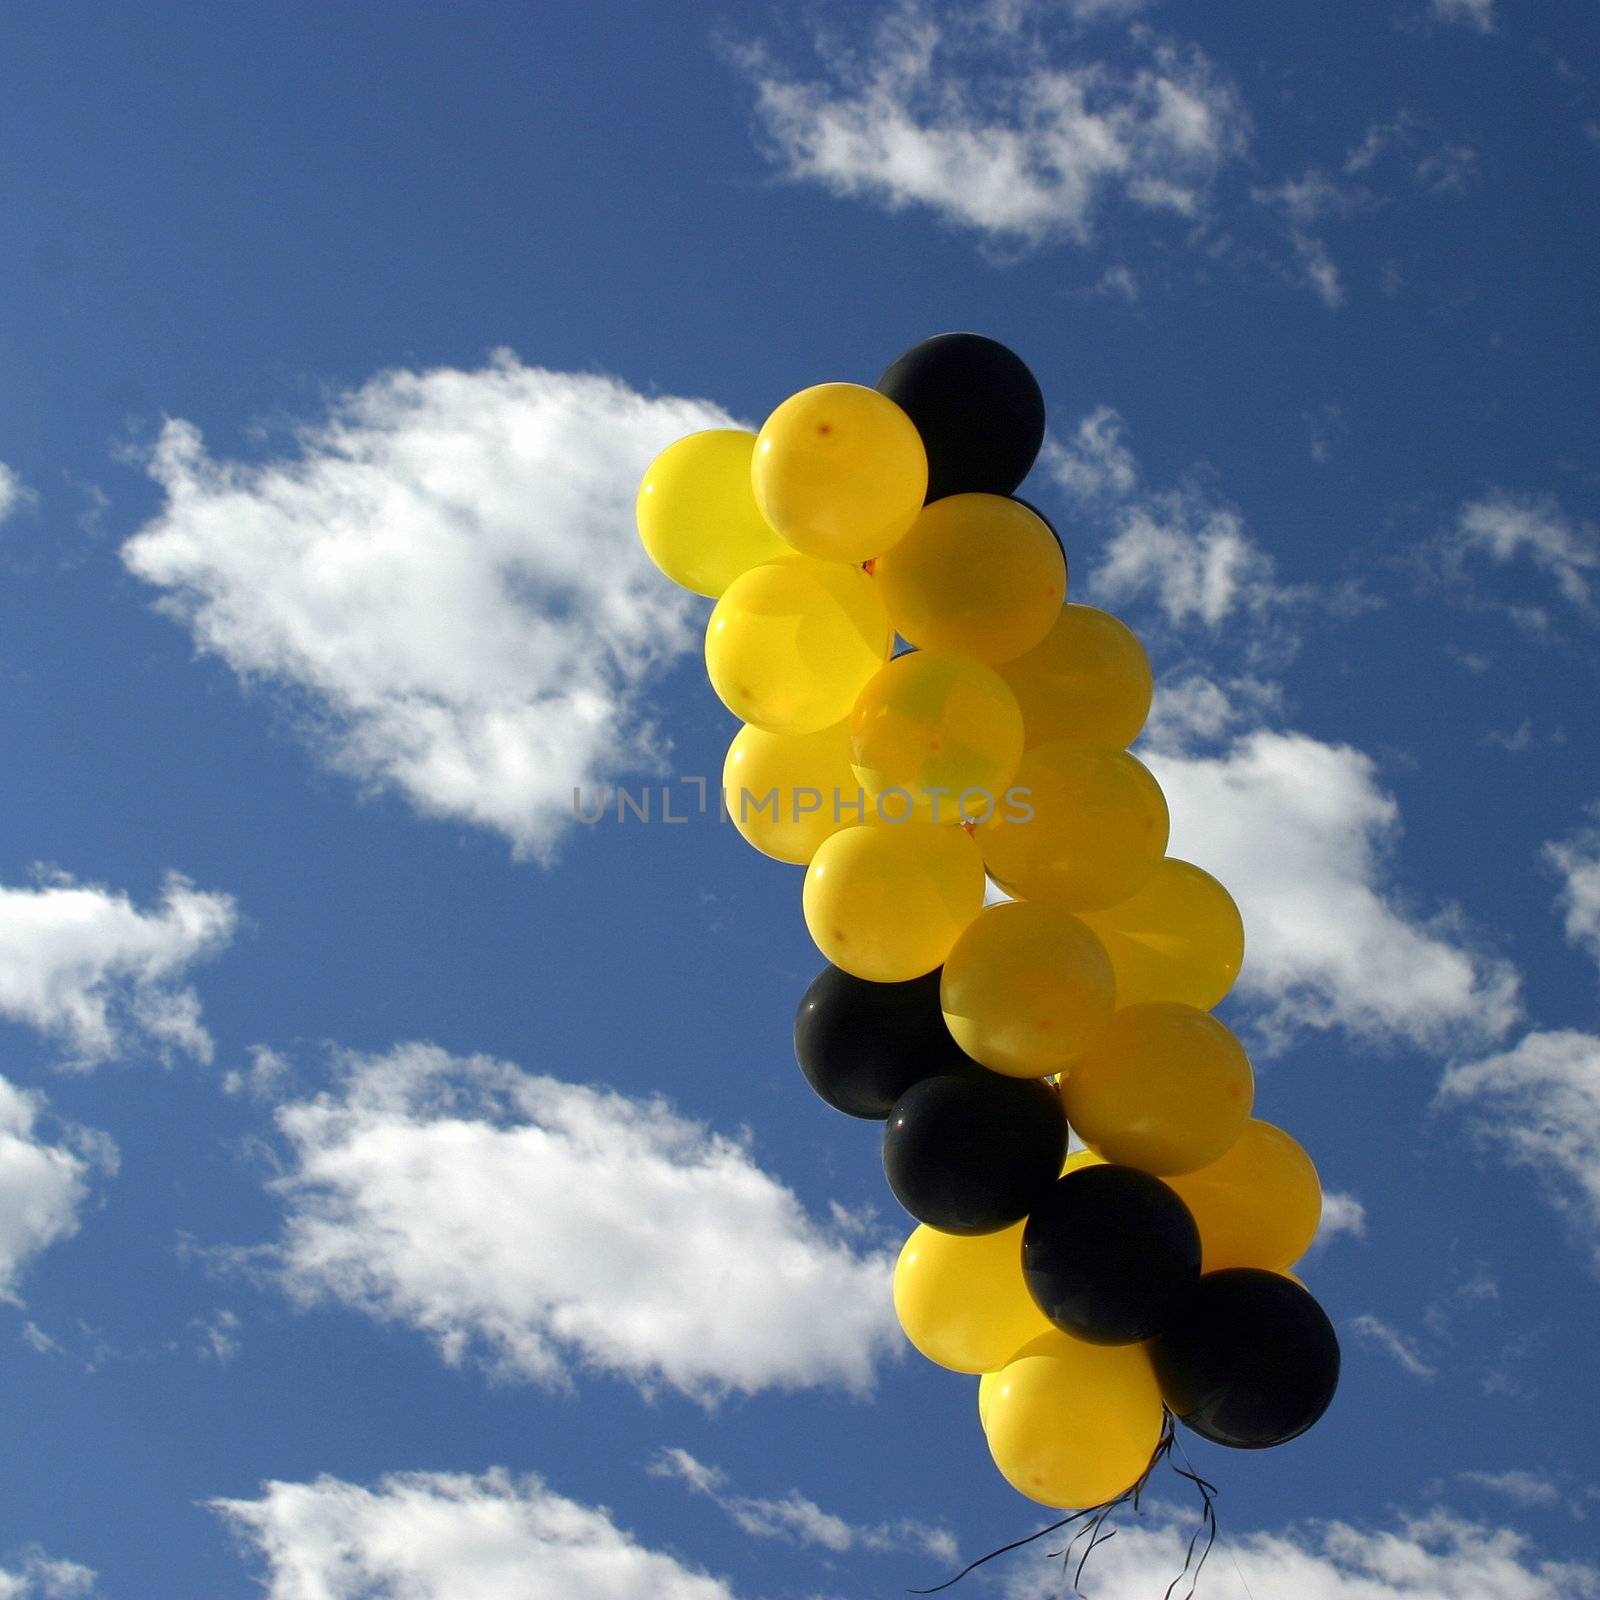 Yellow and black ballons with a blue cloudy sky